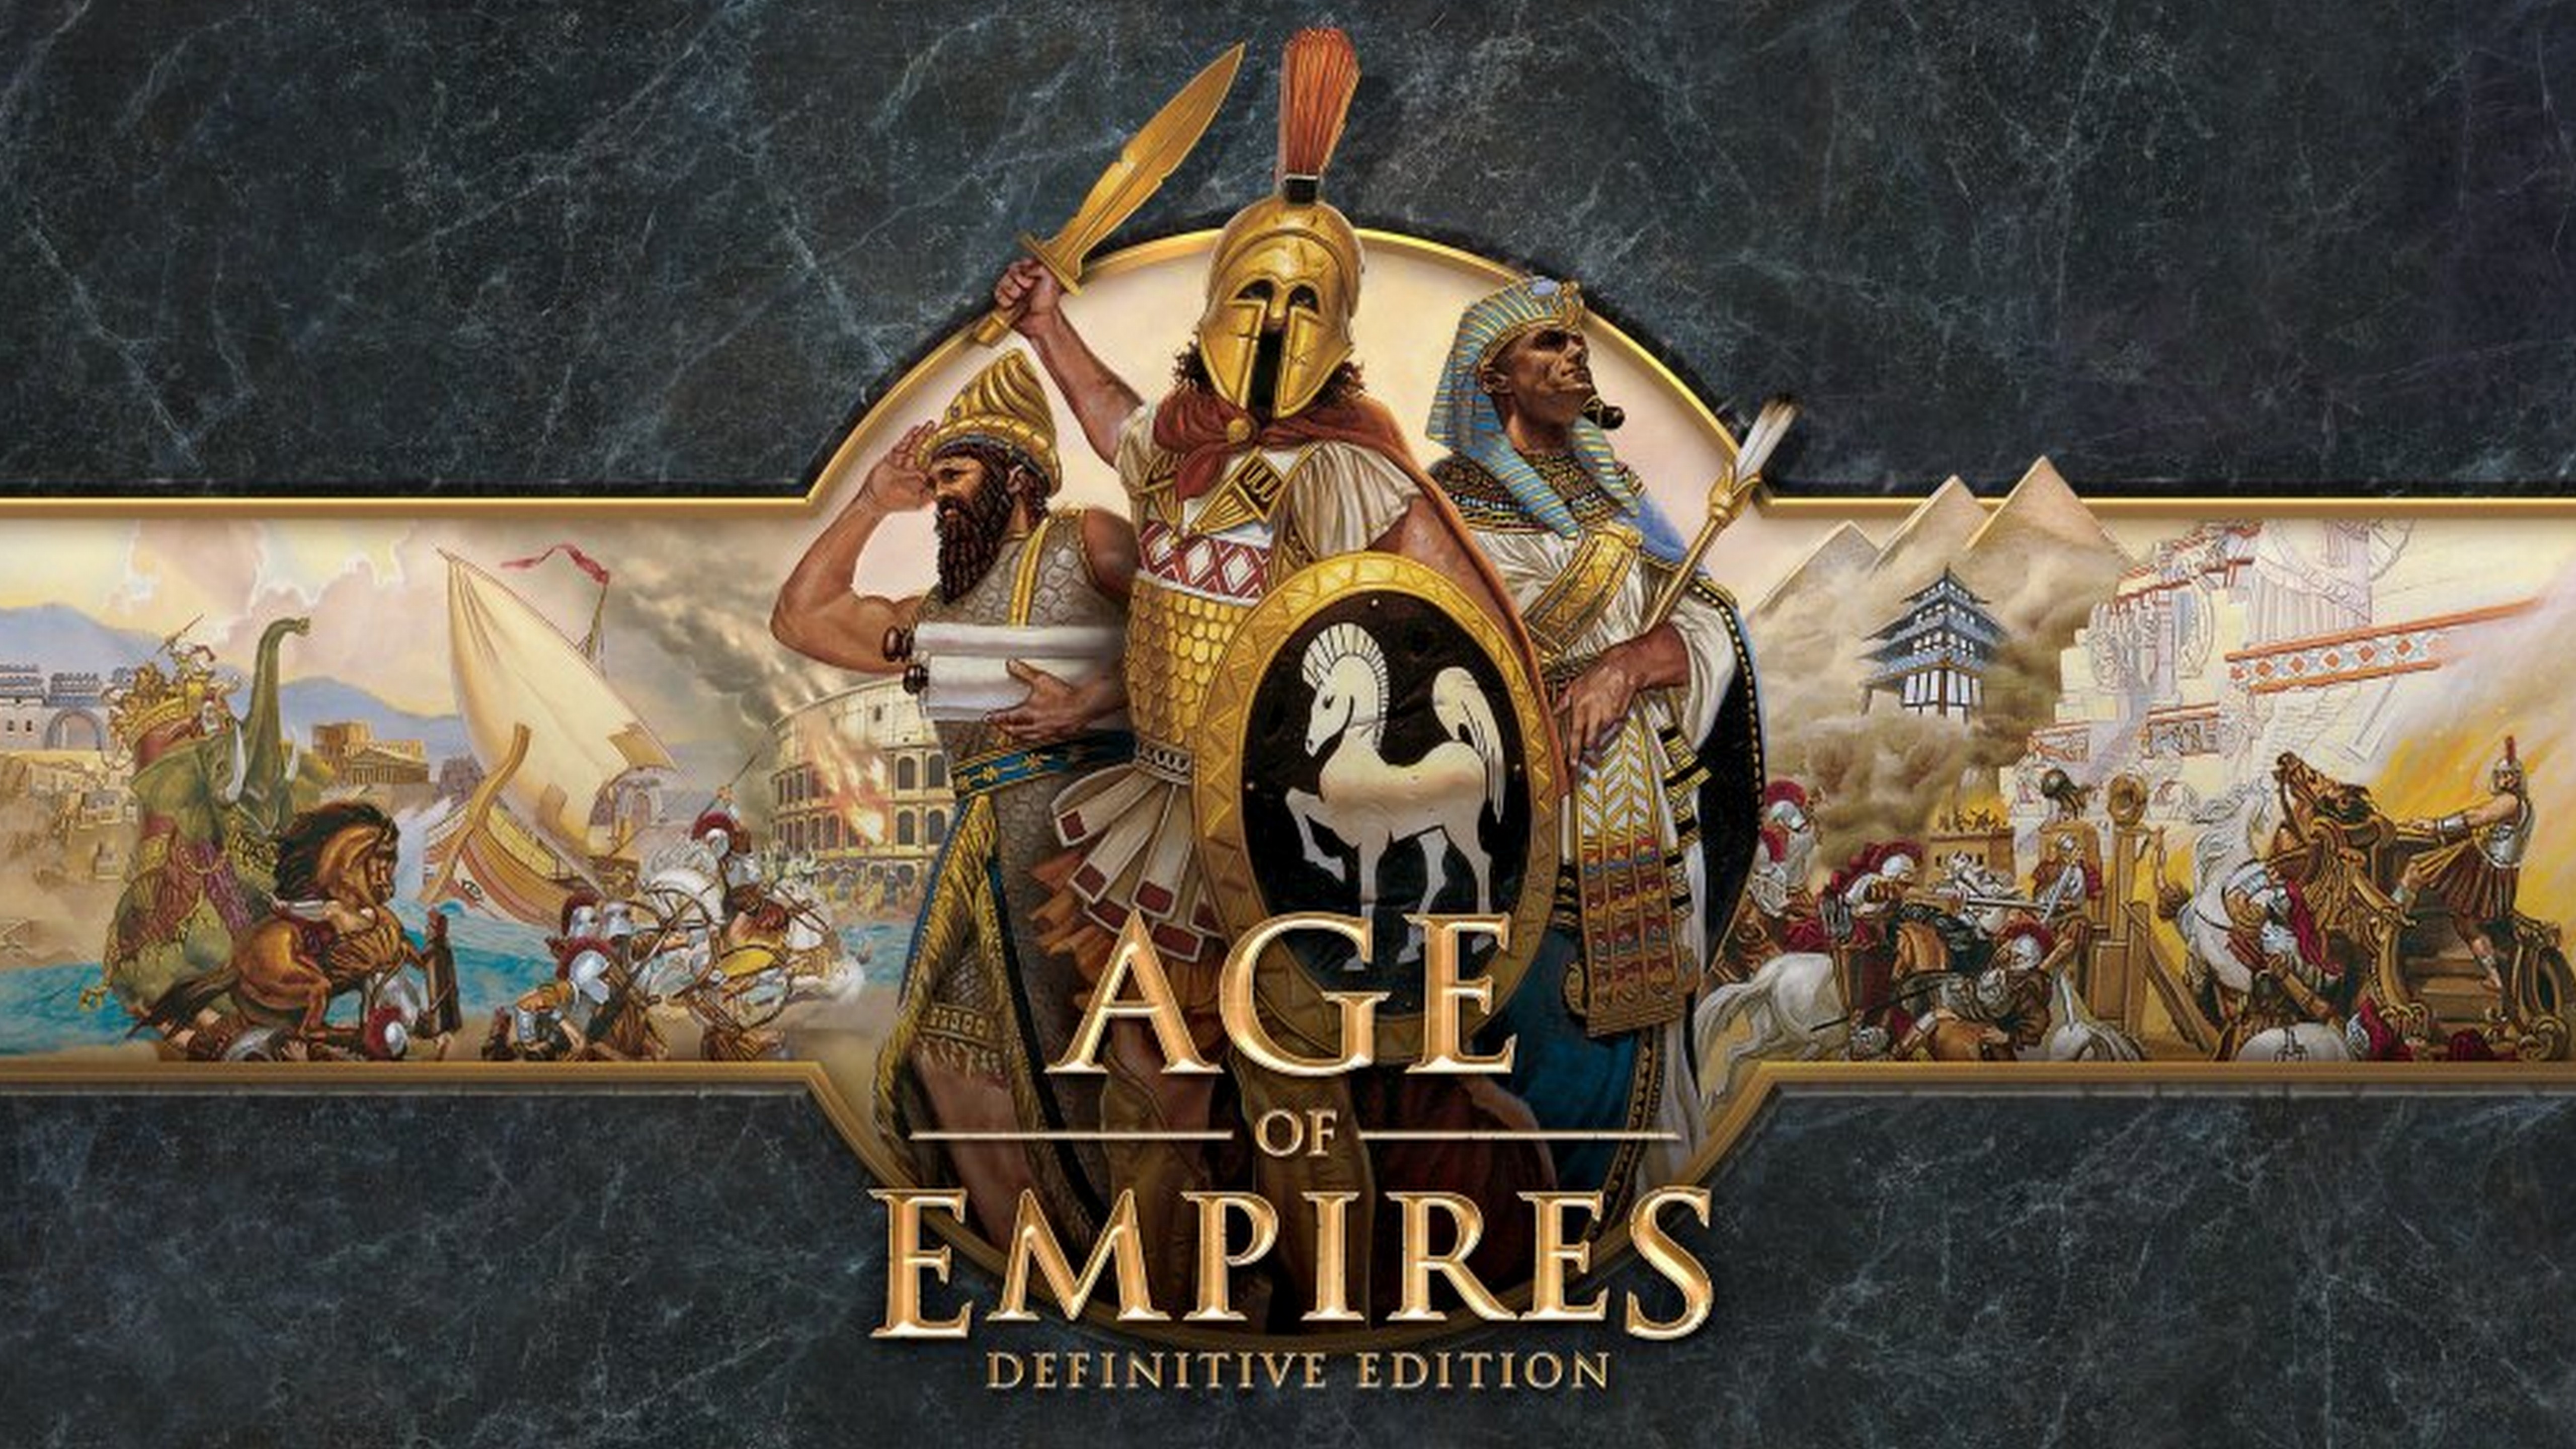 Age of Empires: Definitive Edition is coming exclusively to Windows 10, with a closed beta starting soon